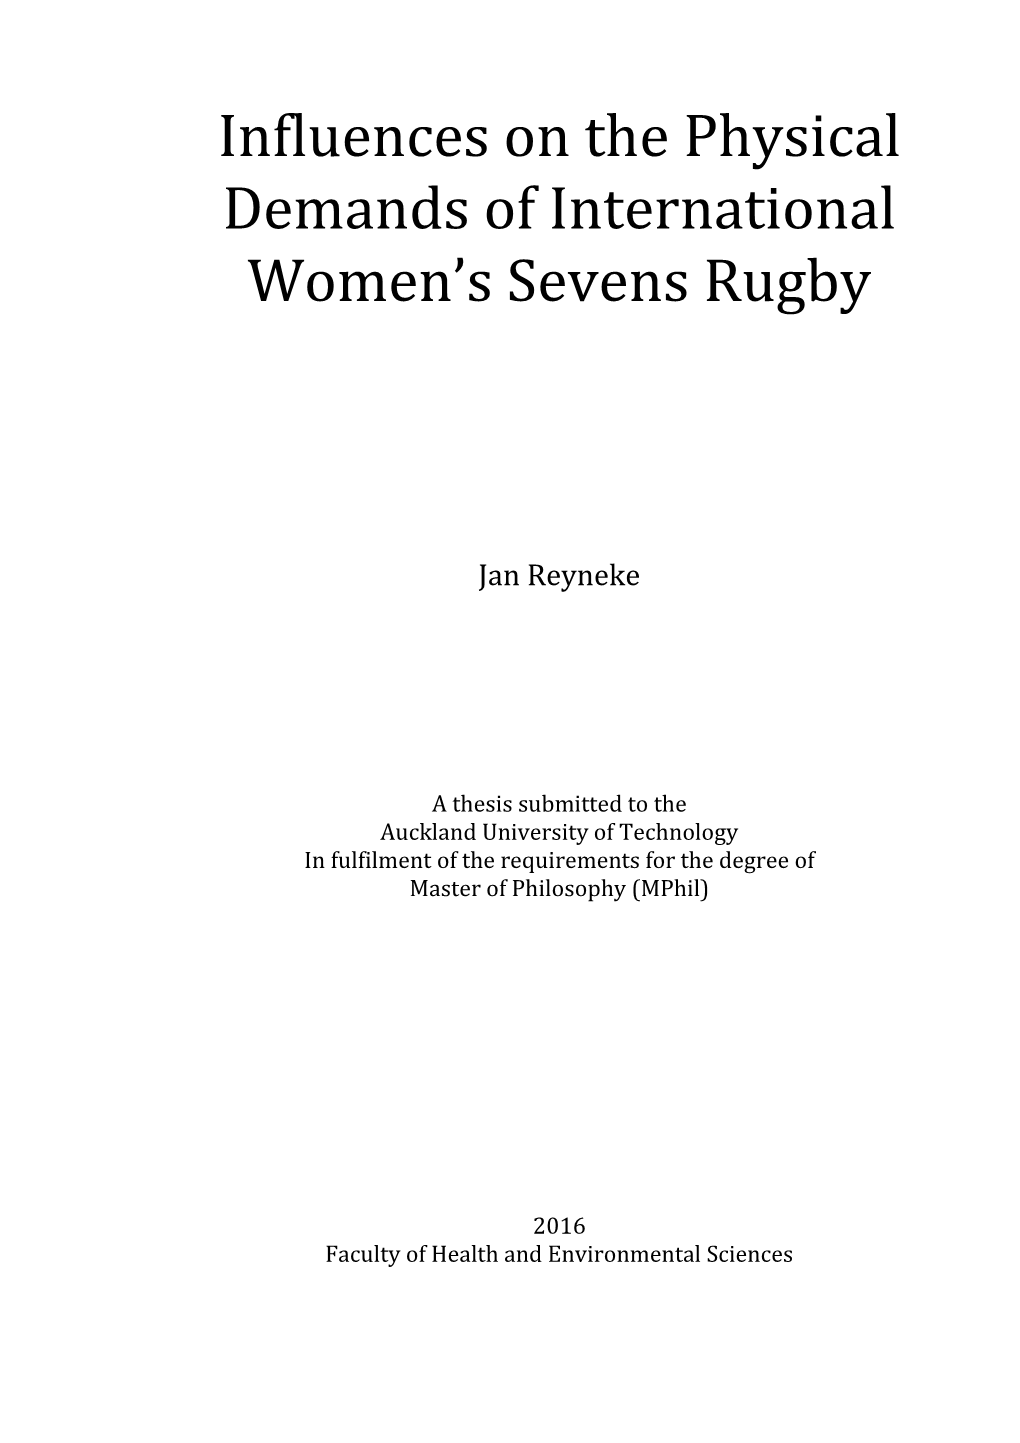 Influences on the Physical Demands of International Women's Sevens